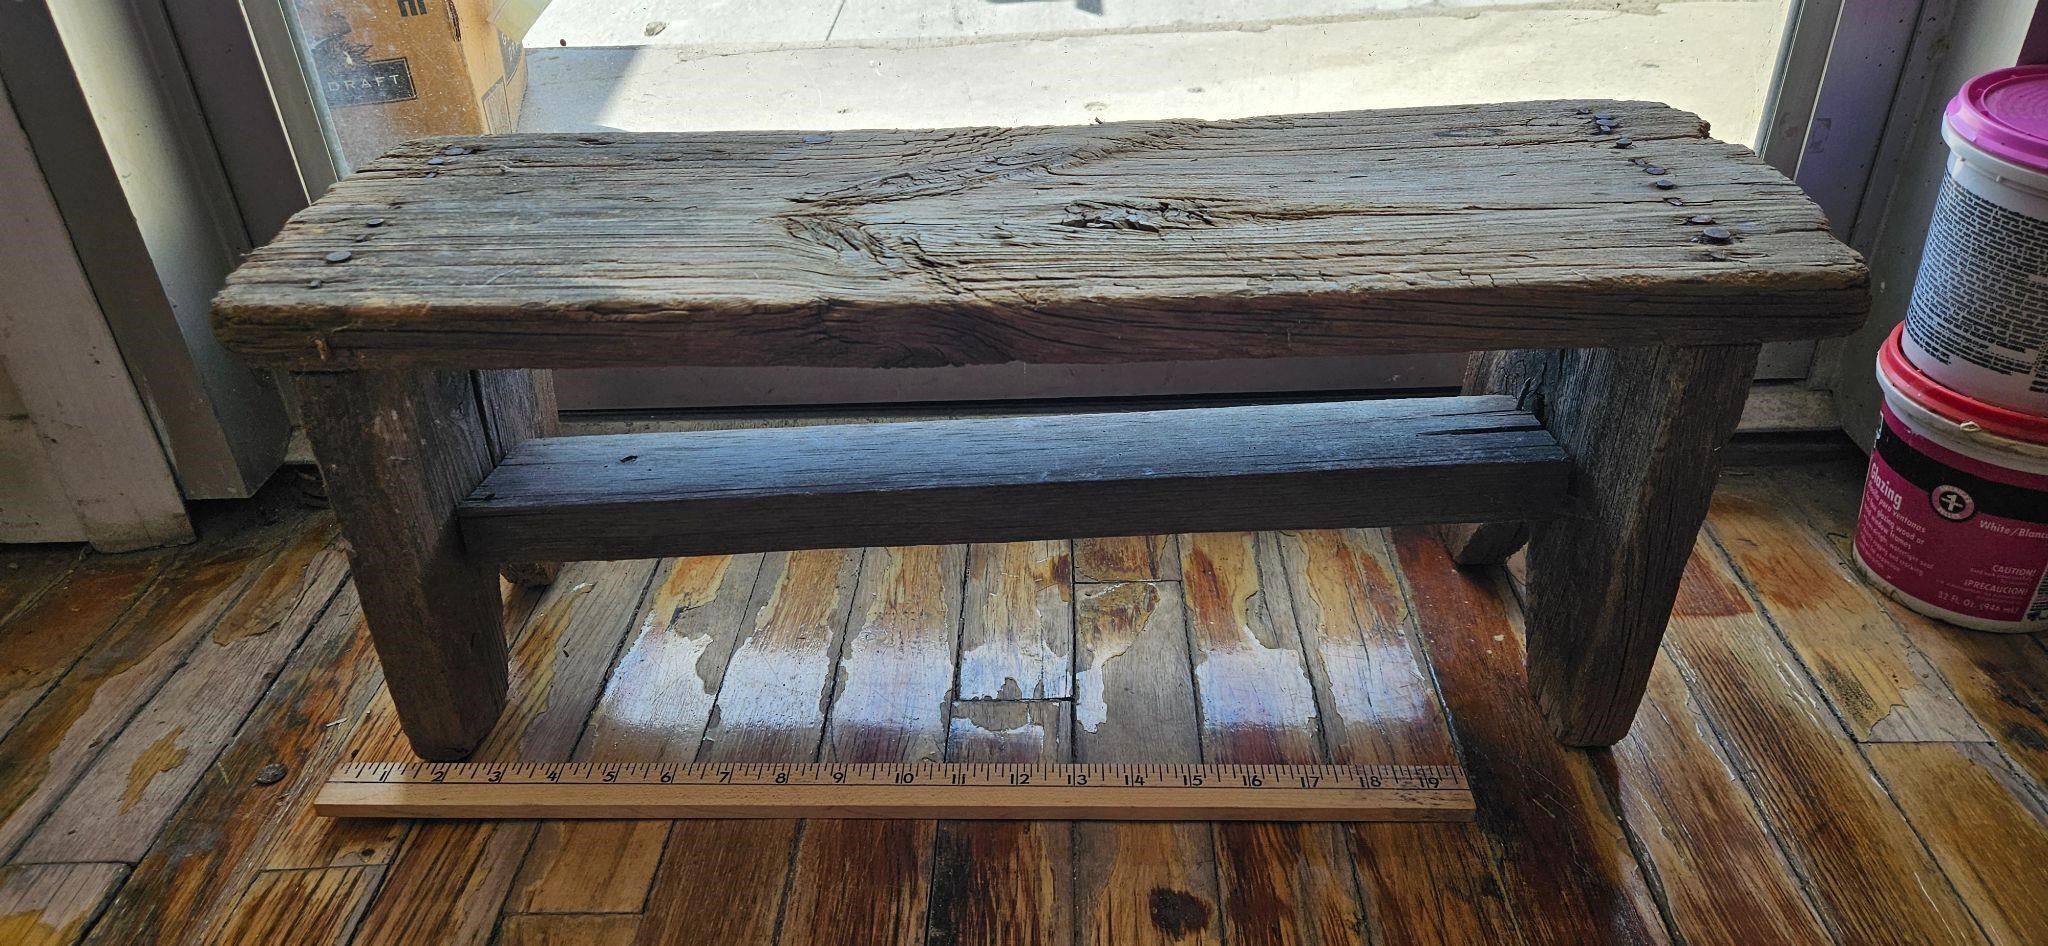 Old Wooden Bench with Some Square Nails